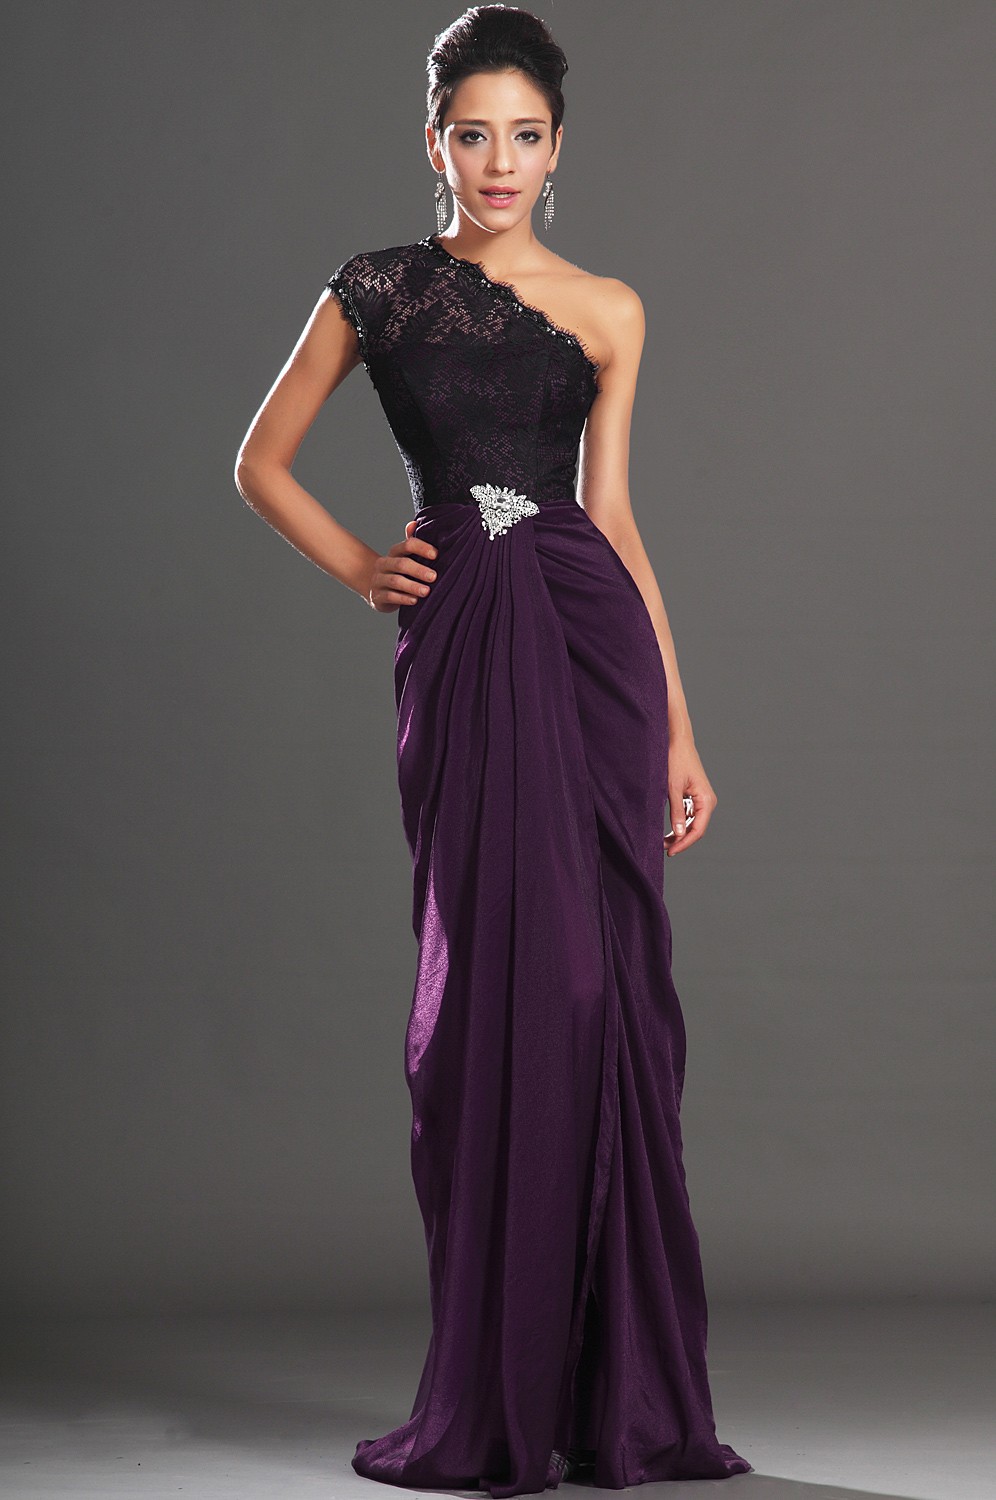 hd-images-of-evening-dress